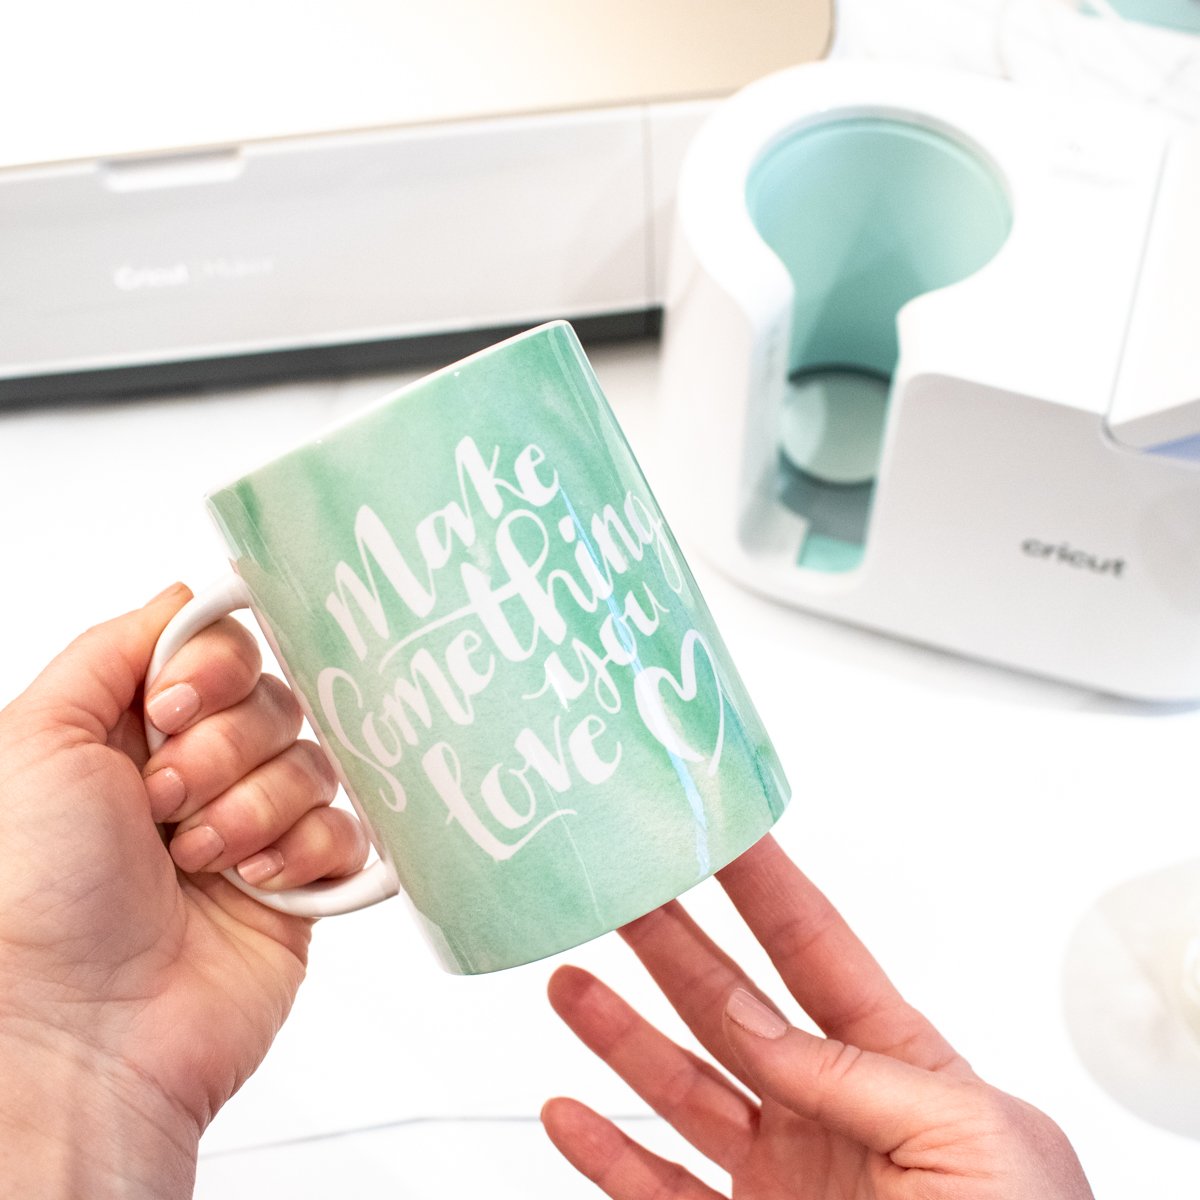 Our Ultimate Guide to the New Cricut Mug Press – Sustain My Craft